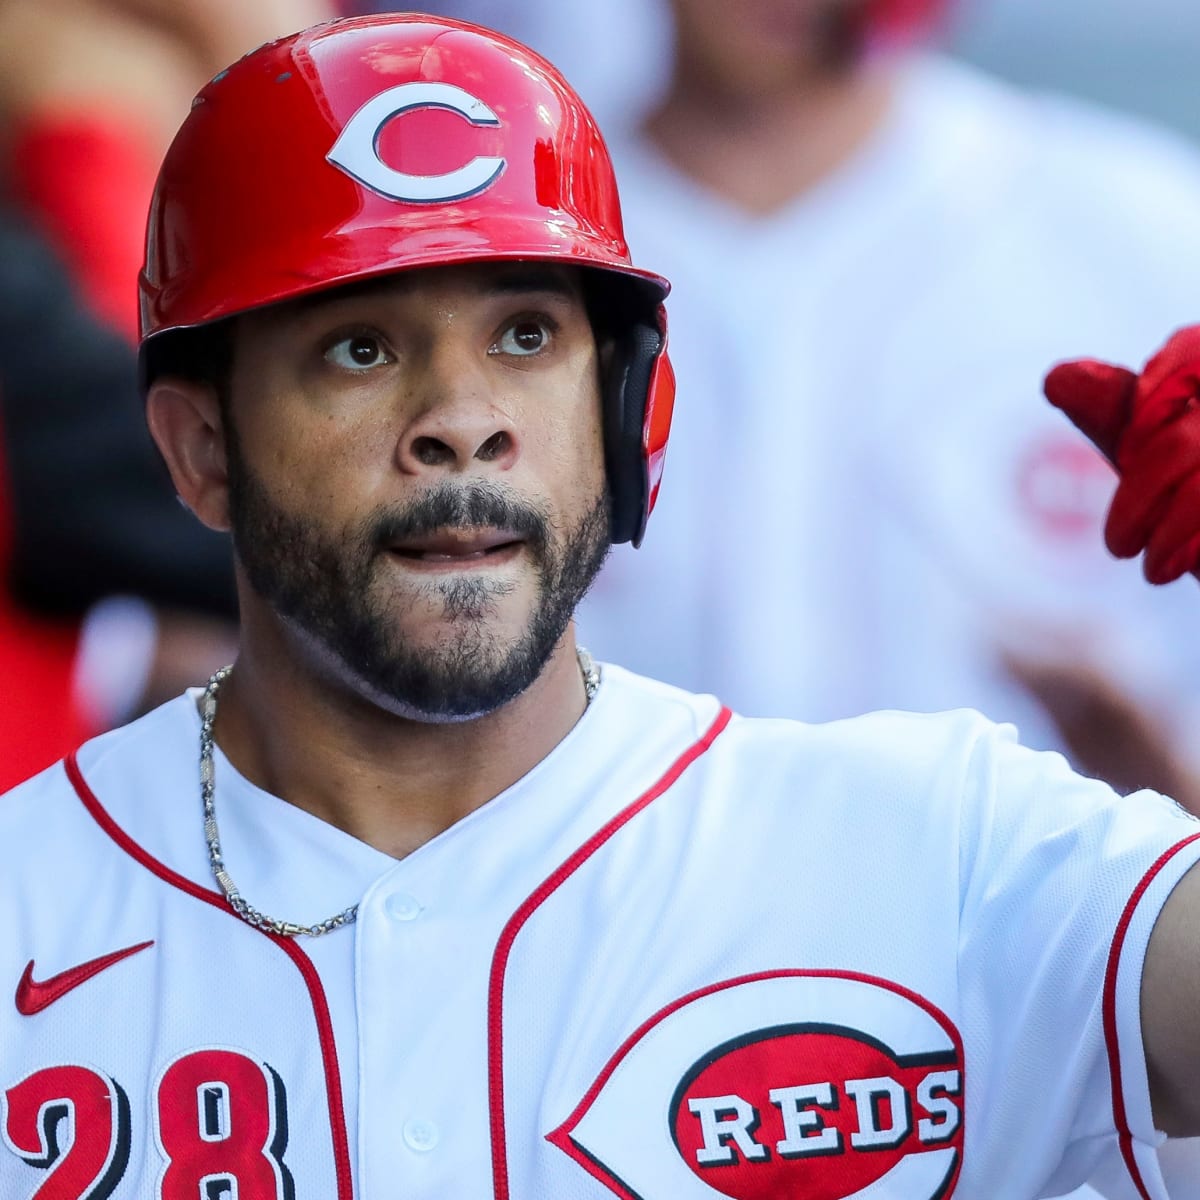 Red Sox acquire outfielder Tommy Pham from Reds